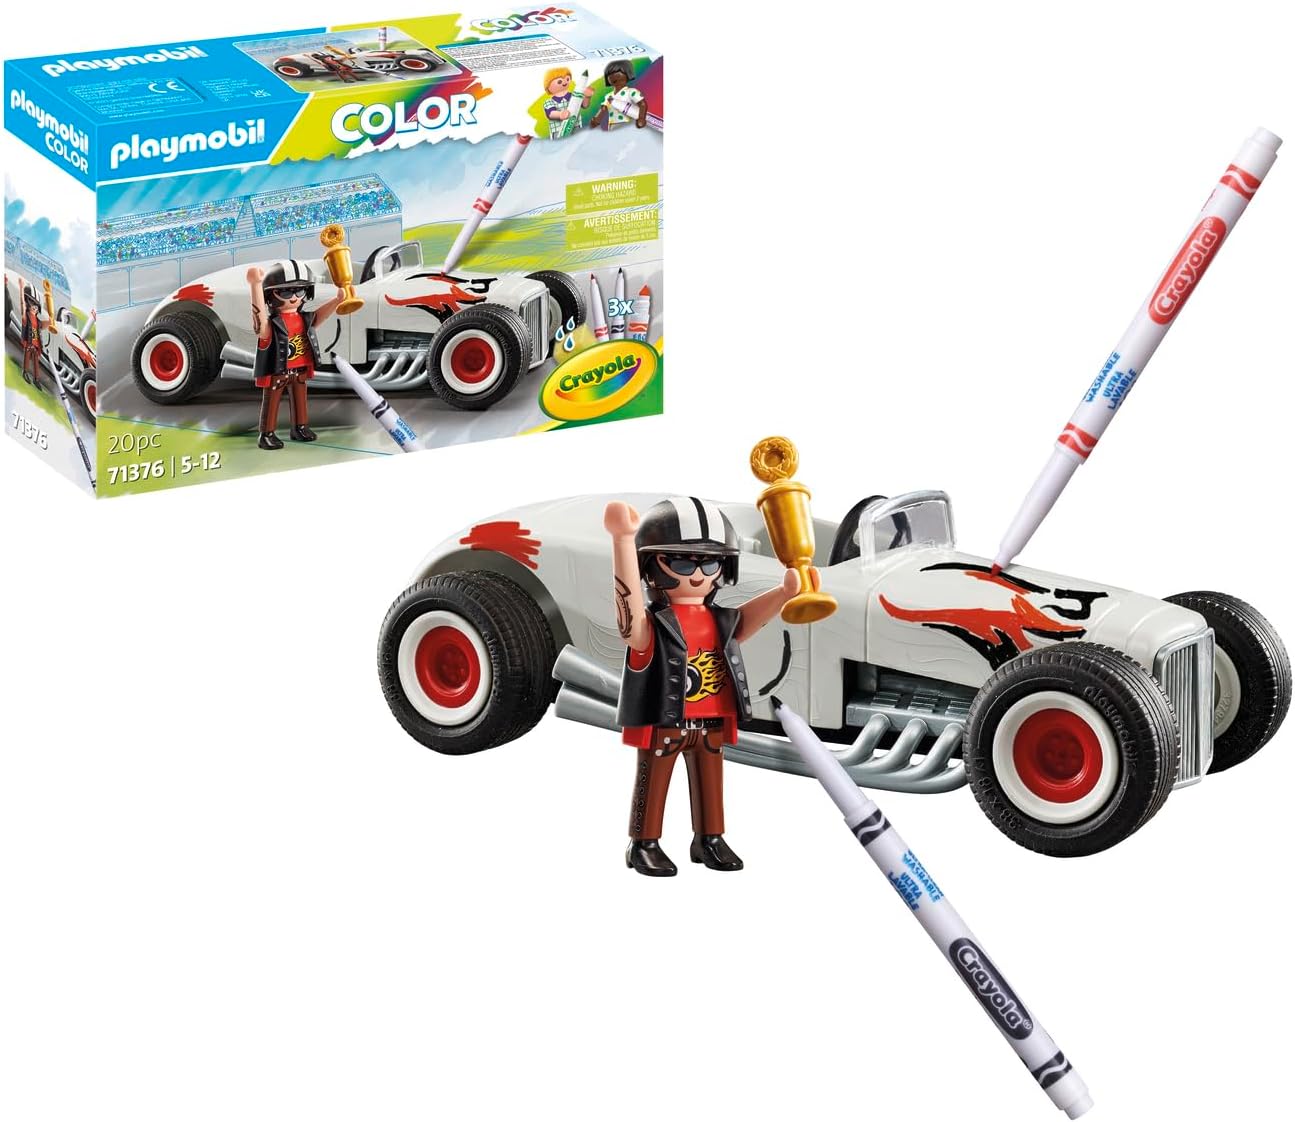 PLAYMOBIL Color 71376 Racing Car, Creative Colour Fun for Car Fans with Water Soluble Pens, Sponge and Numerous Accessories, Artistic Toy for Children from 5 Years